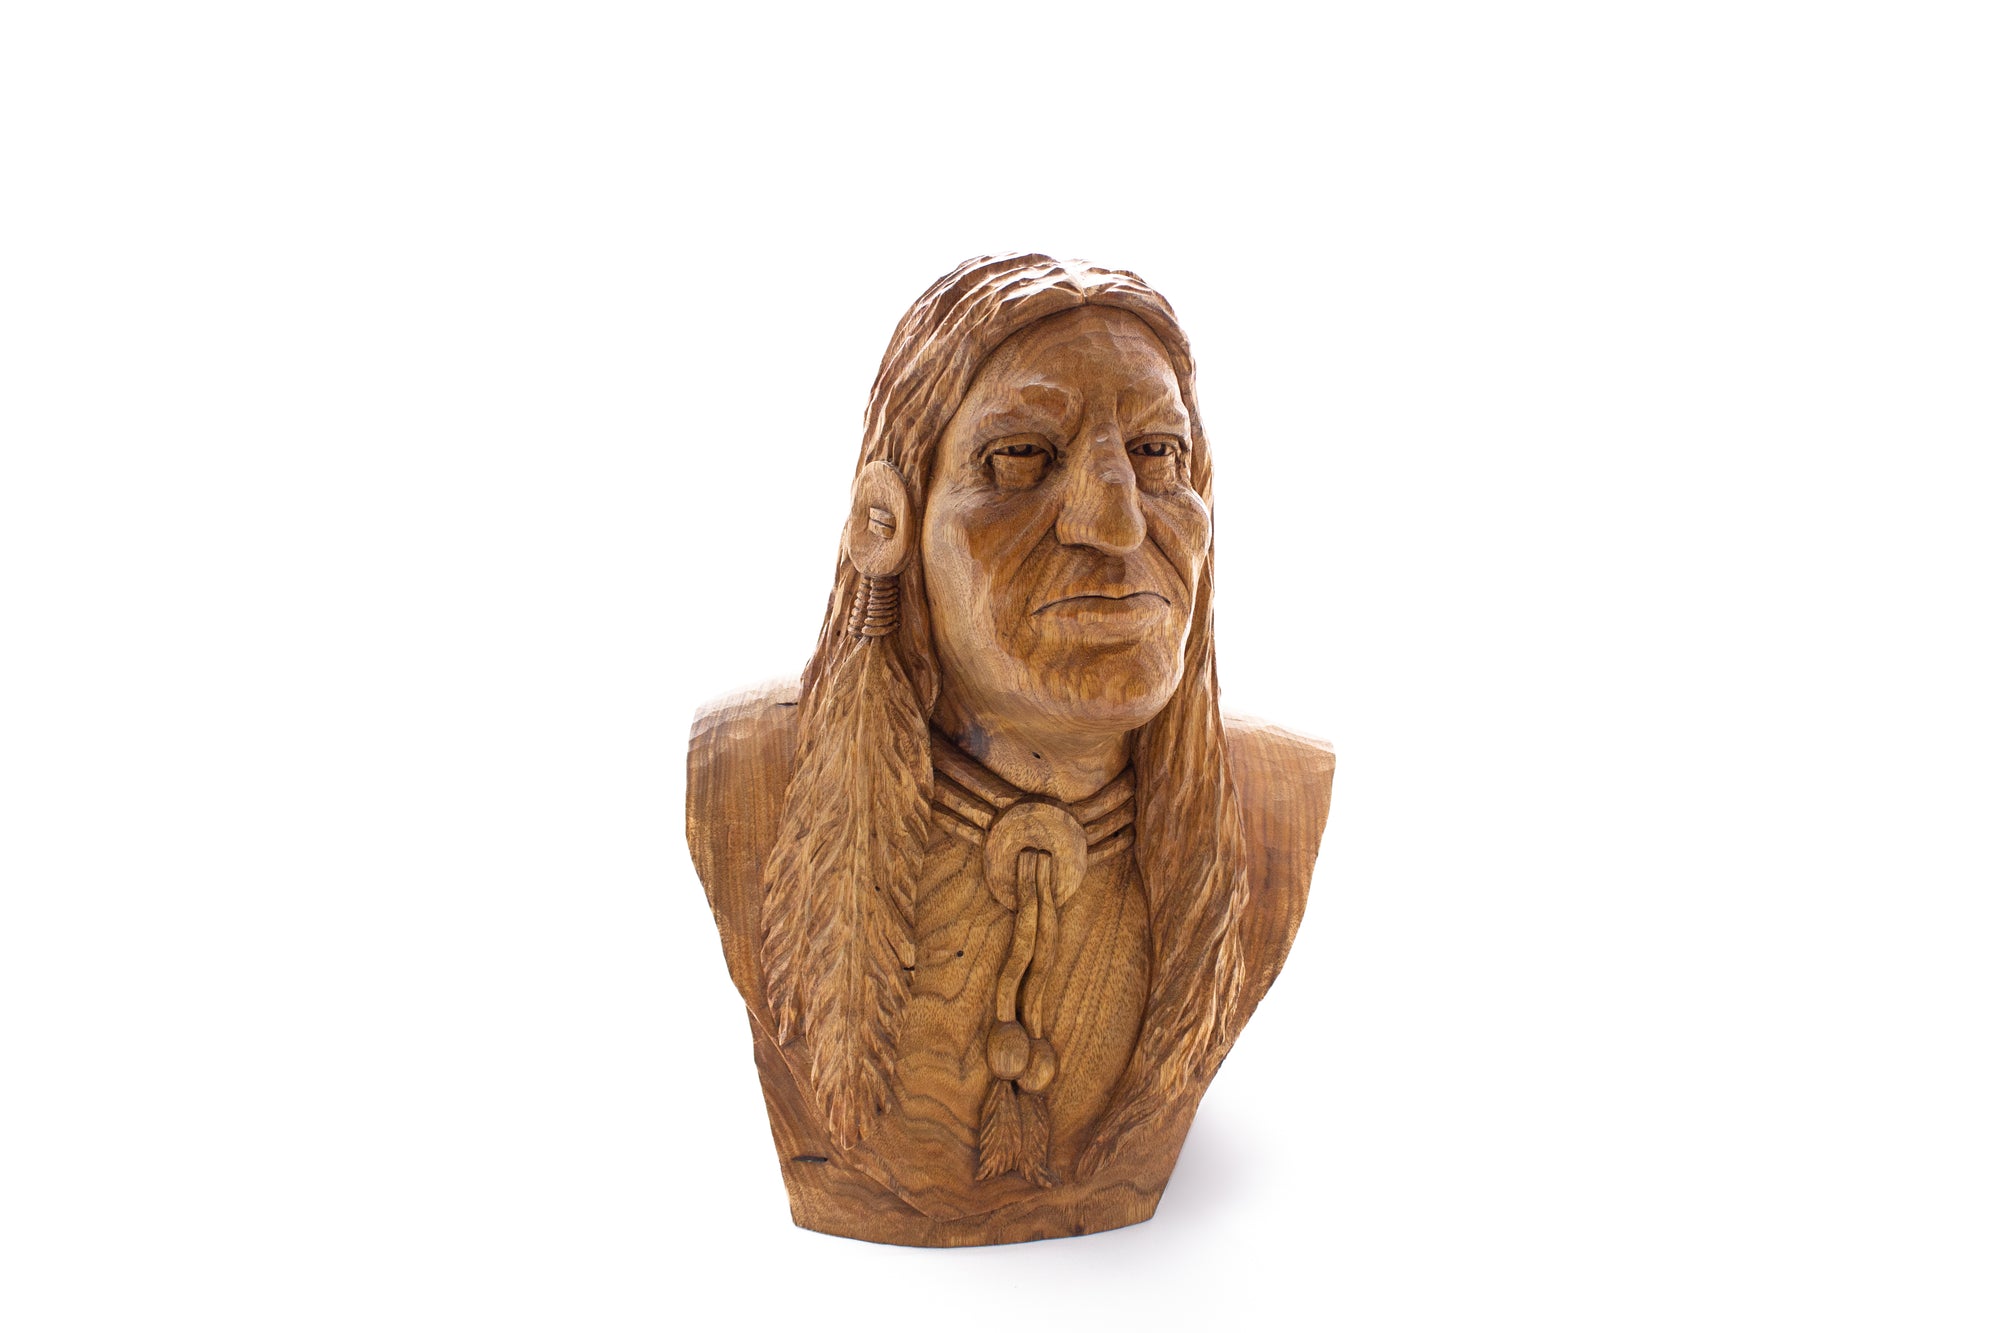 Large Native American Bust Wood Carving (Pick Up or In Person Purchase Only)